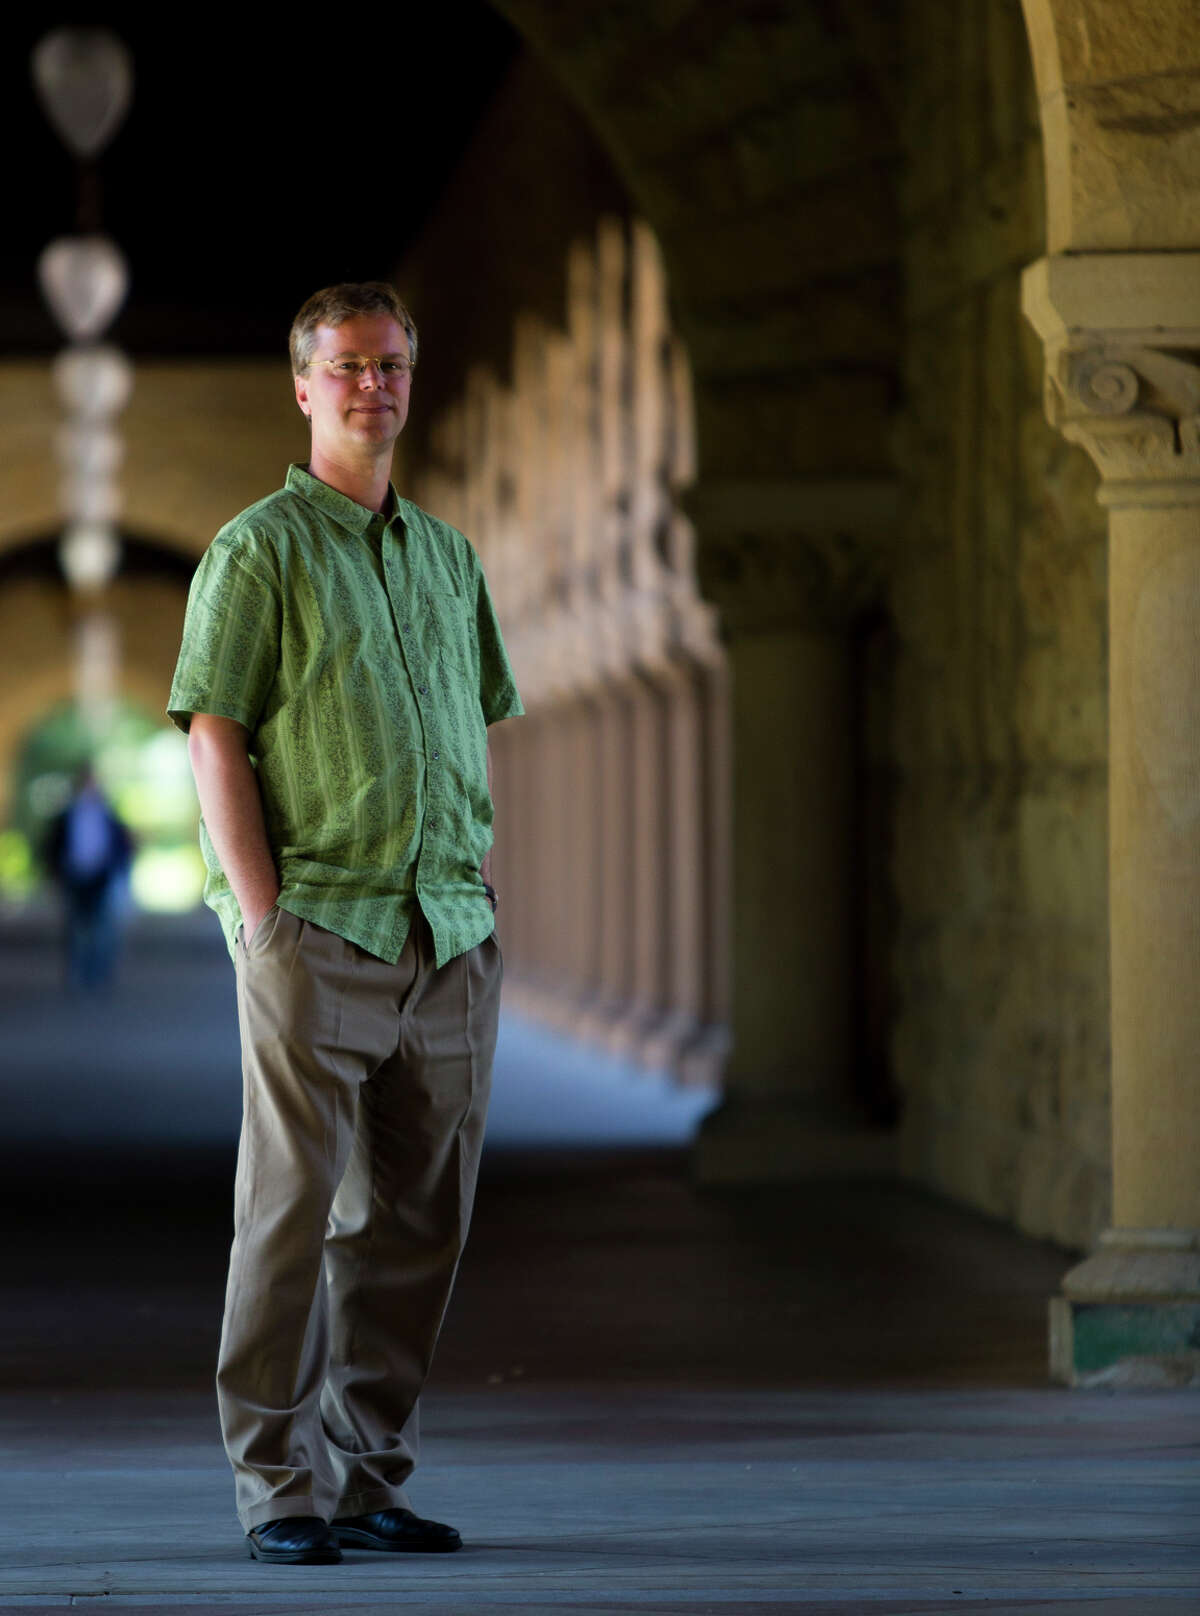 Linked-In co-founder Konstantin Guericke stands in a hall at Stanford.